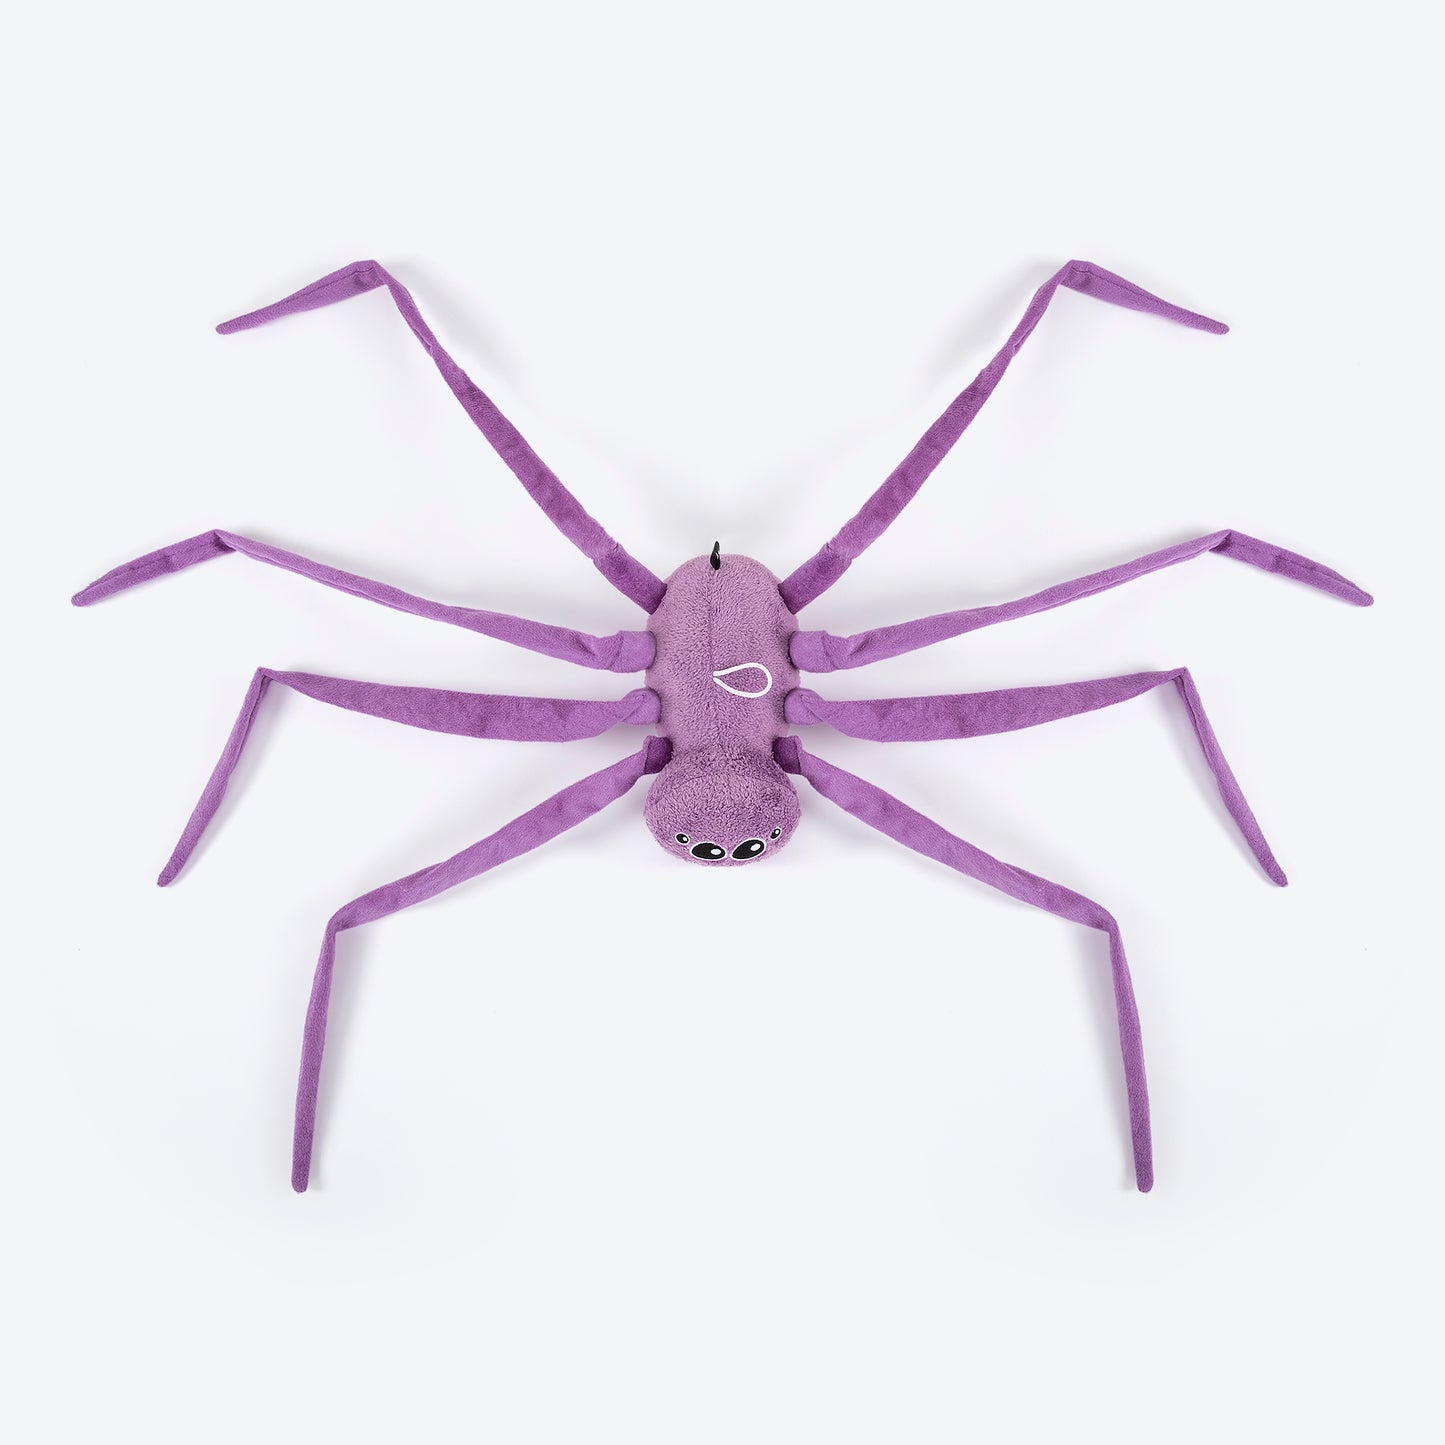 HUFT Spider Big Cuddle Toy For Dogs - Heads Up For Tails